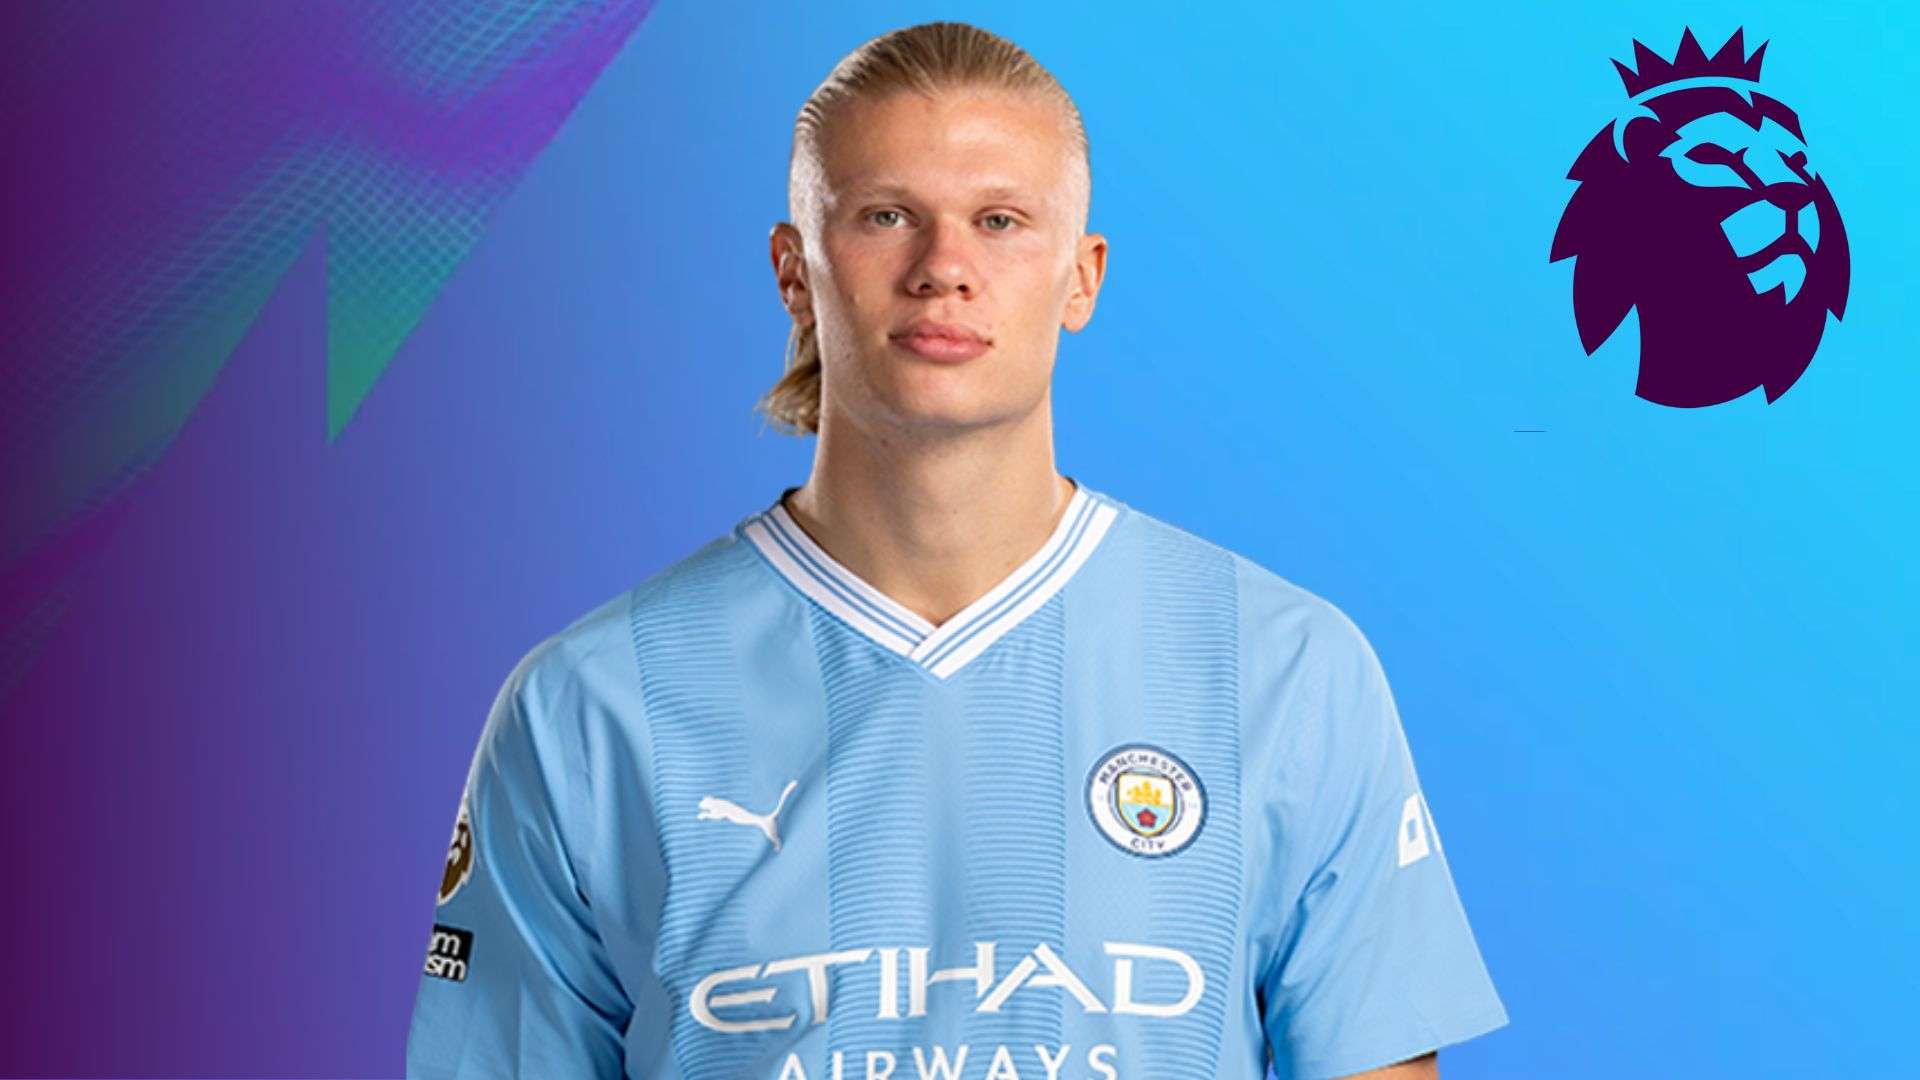 Erling Haaland in sky blue Manchester City jersey next to Premier League logo